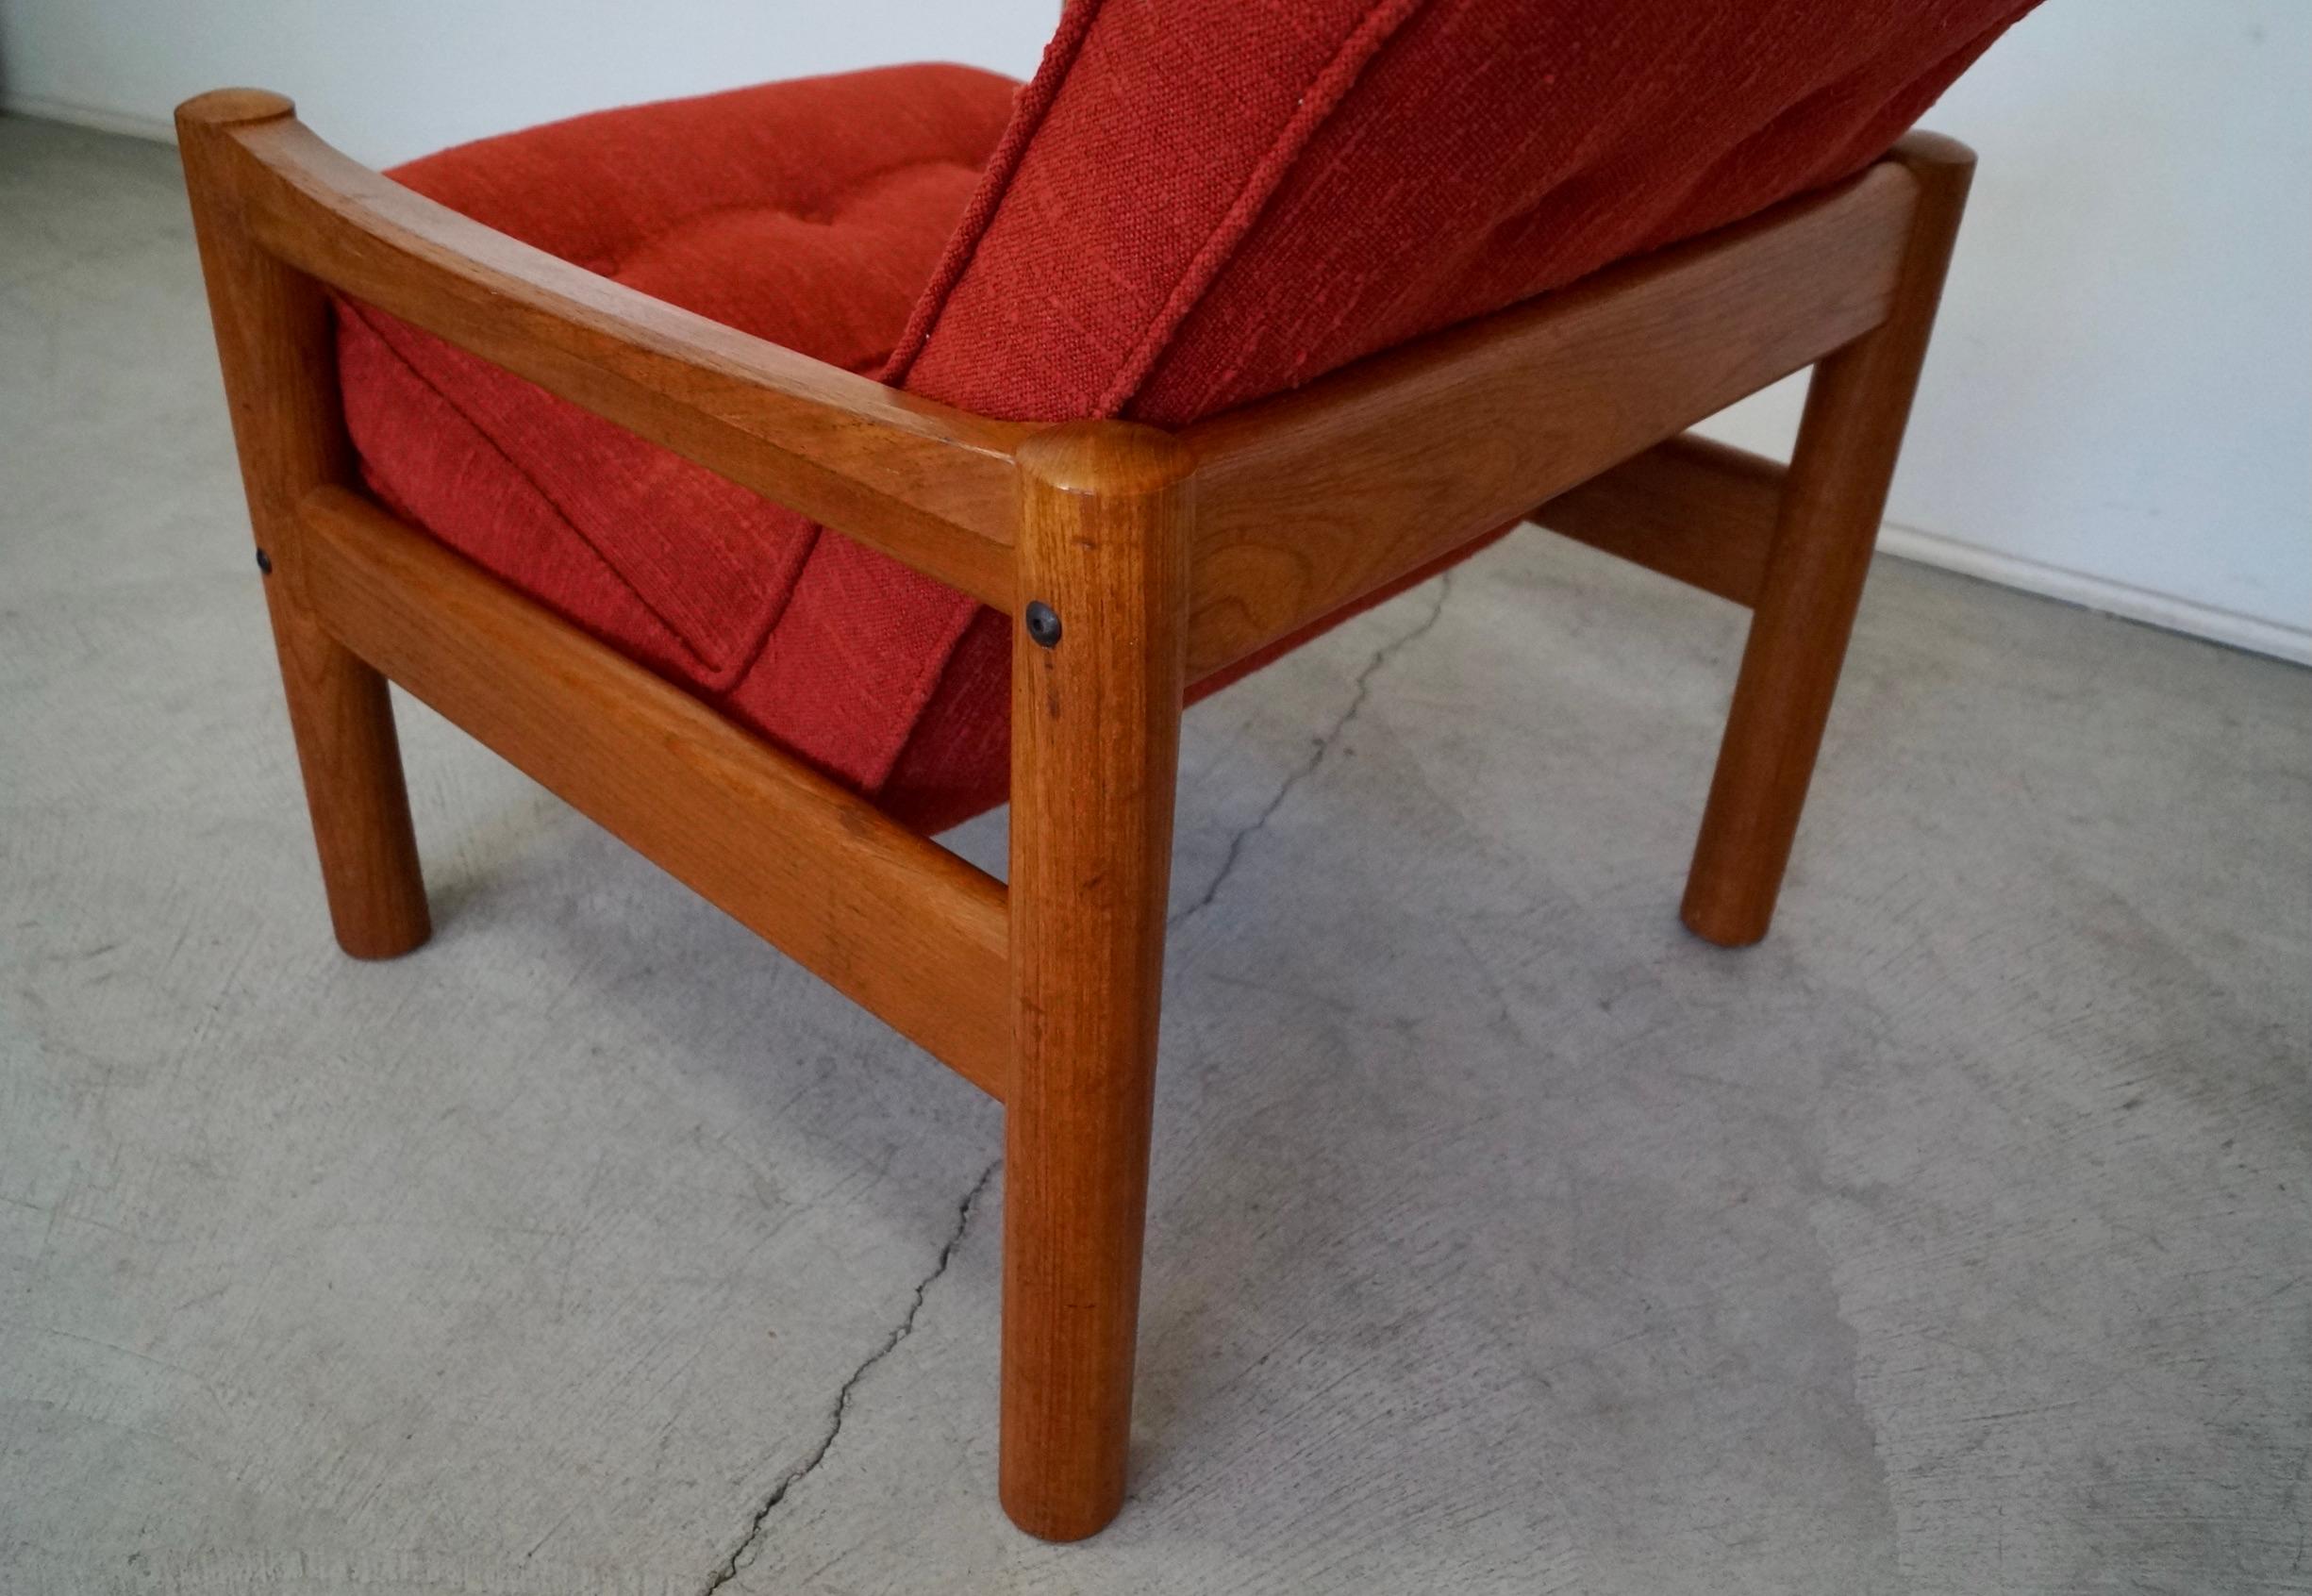 1970's Danish Modern Teak Lounge Chairs by Domino Mobler - a Pair For Sale 10